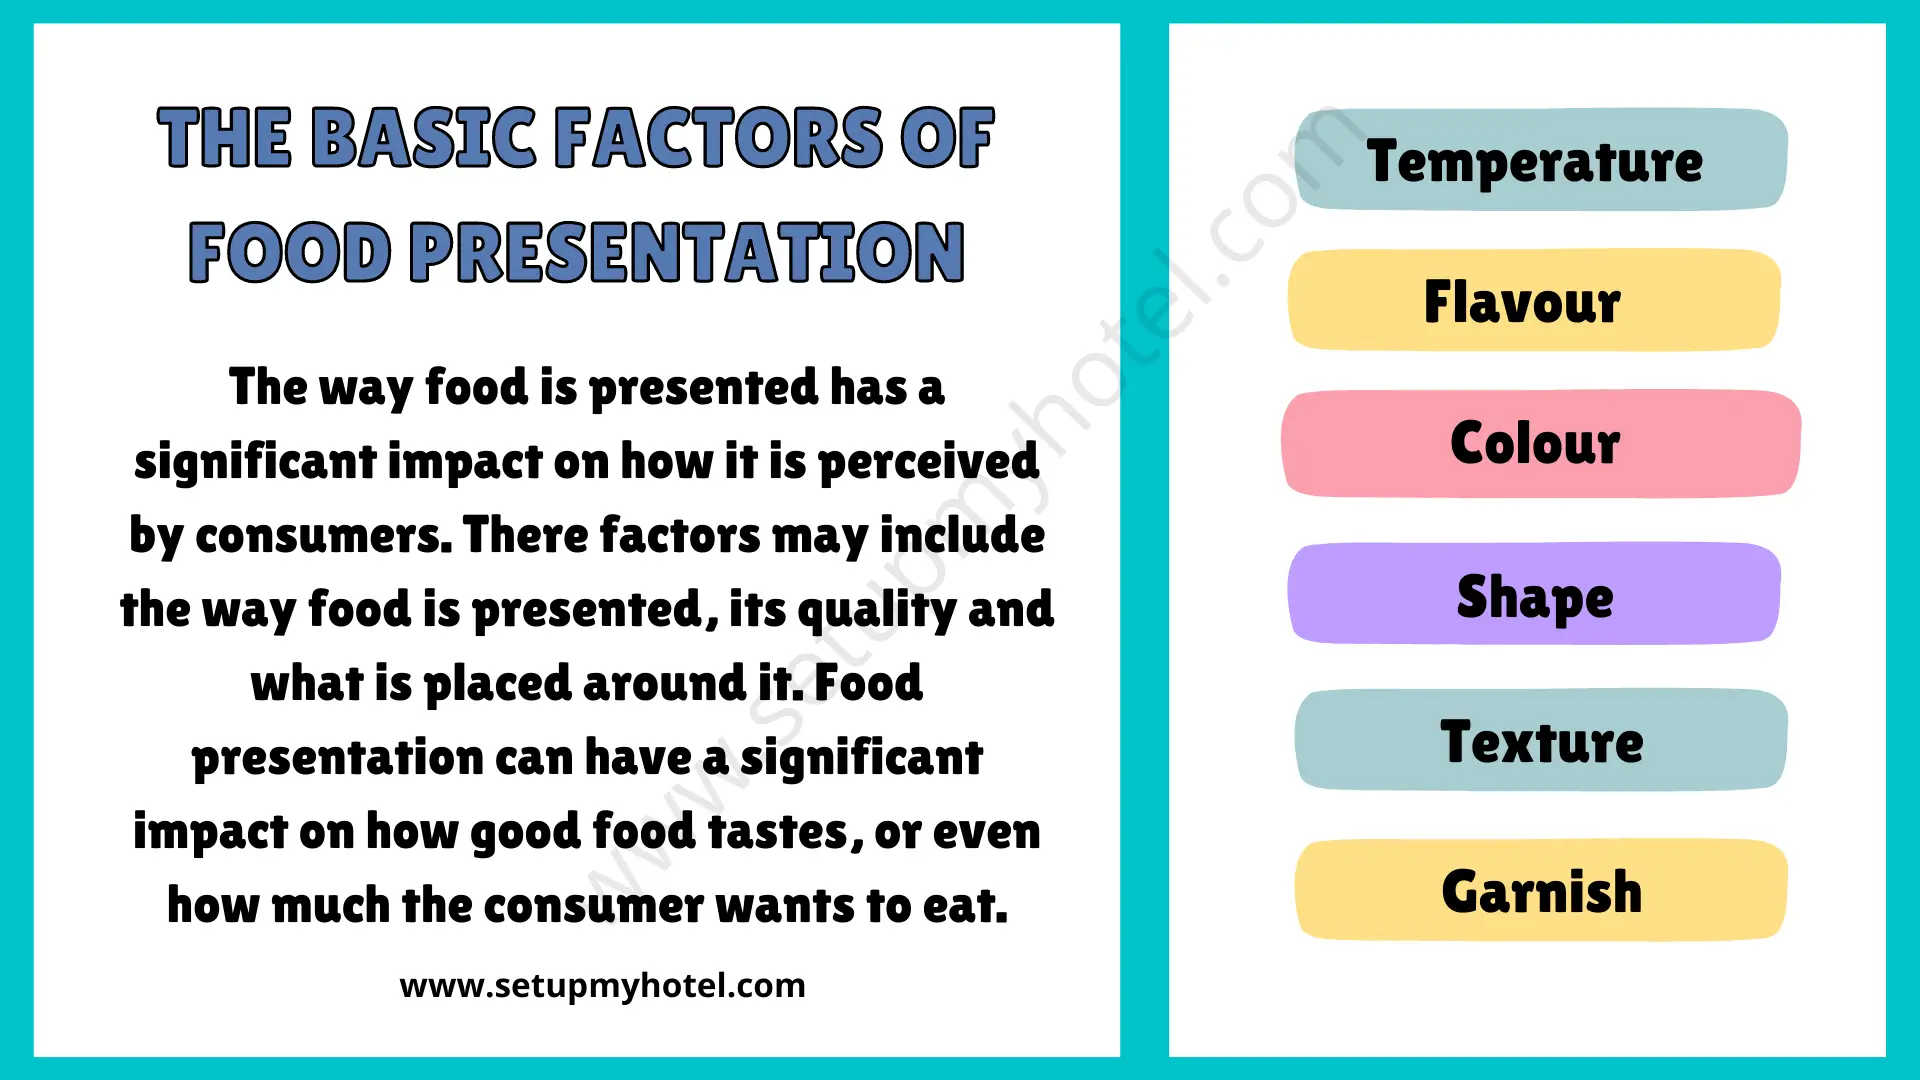 Basic Factors Of Food Presentation in the Hotel Industry The way food is presented has a significant impact on how it is perceived by consumers. These factors may include the way food is presented, its quality, and what is placed around it. Food presentation can have a significant impact on how good food tastes, or even how much the consumer wants to eat.